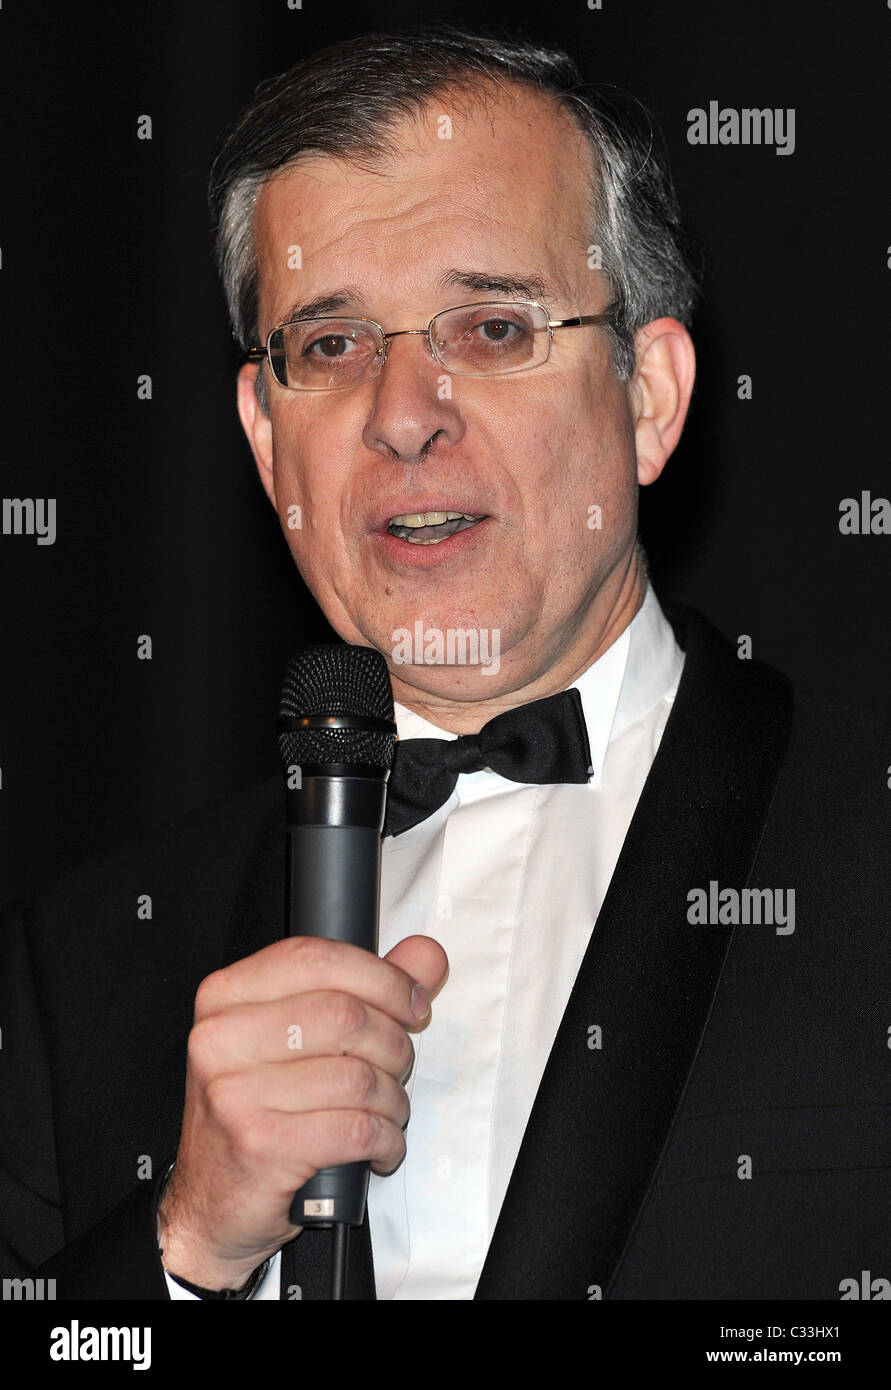 The French Ambassador Maurice Gourdault-Montagne Gala Launch of Cine lumiere with the preview screening of 'A Christmas Tale' Stock Photo